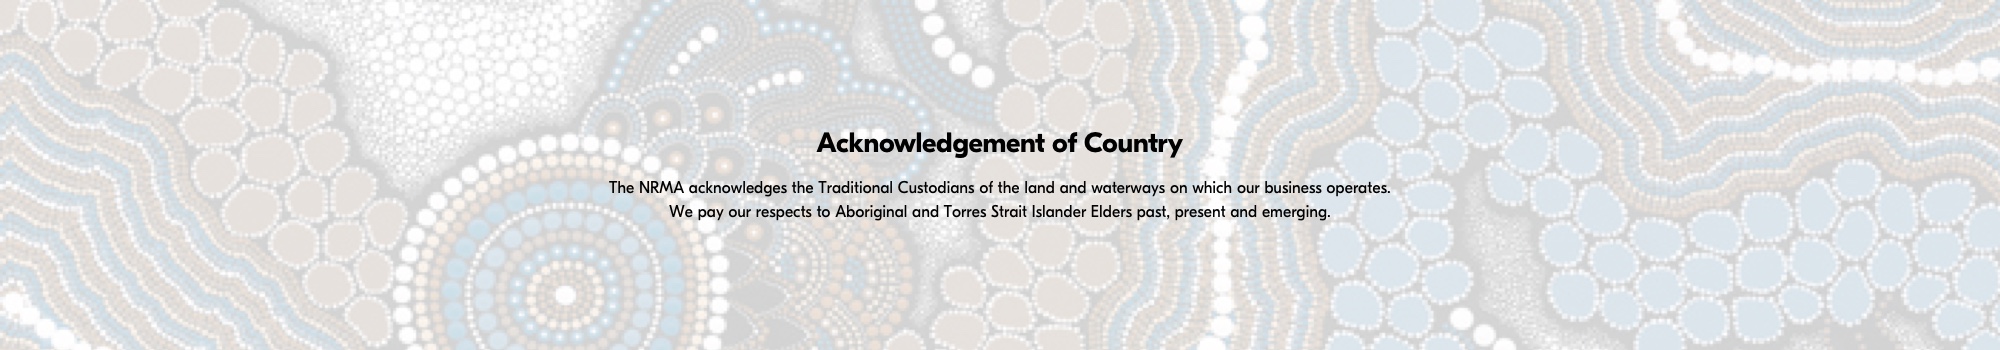 Acknowledgement of Country wide banner